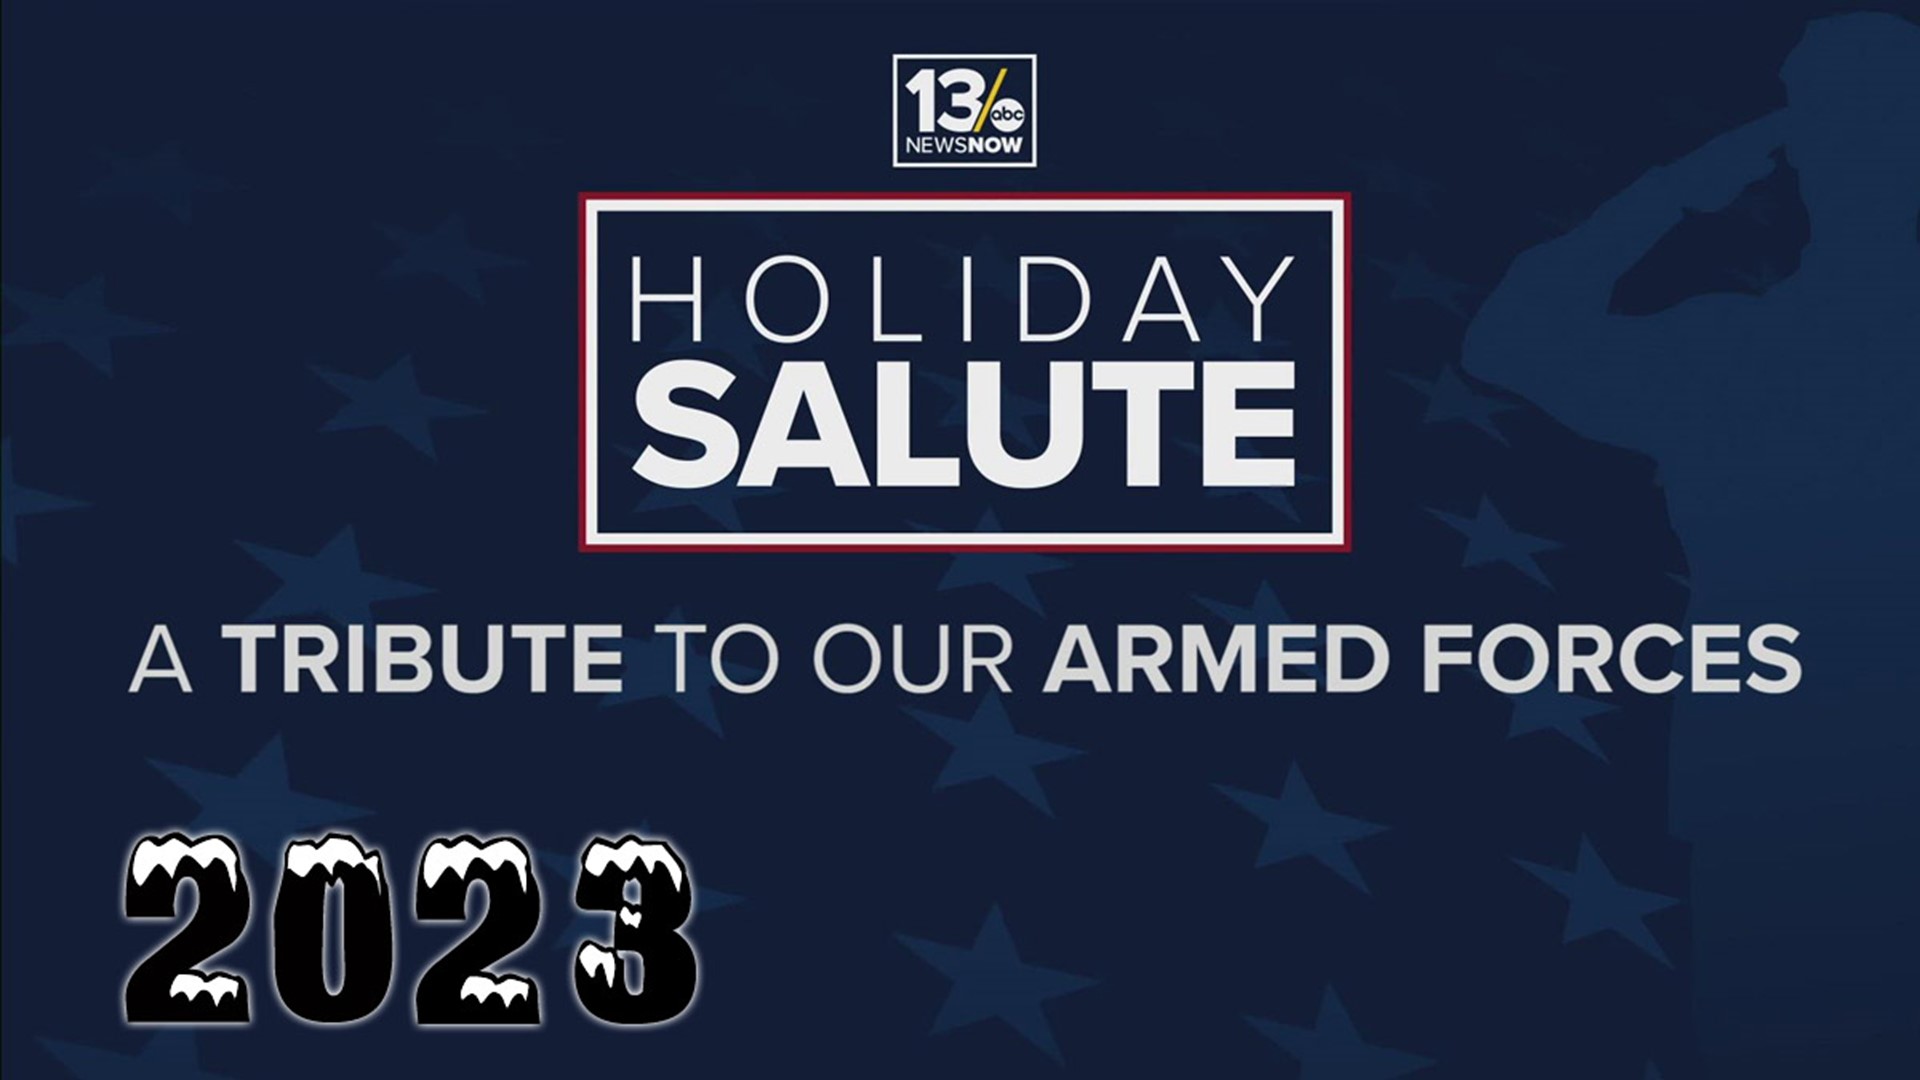 13News Now is excited to present the 38th Annual Holiday Salute, a special program that airs on Christmas. The special puts the spotlight on our dedicated servicemen